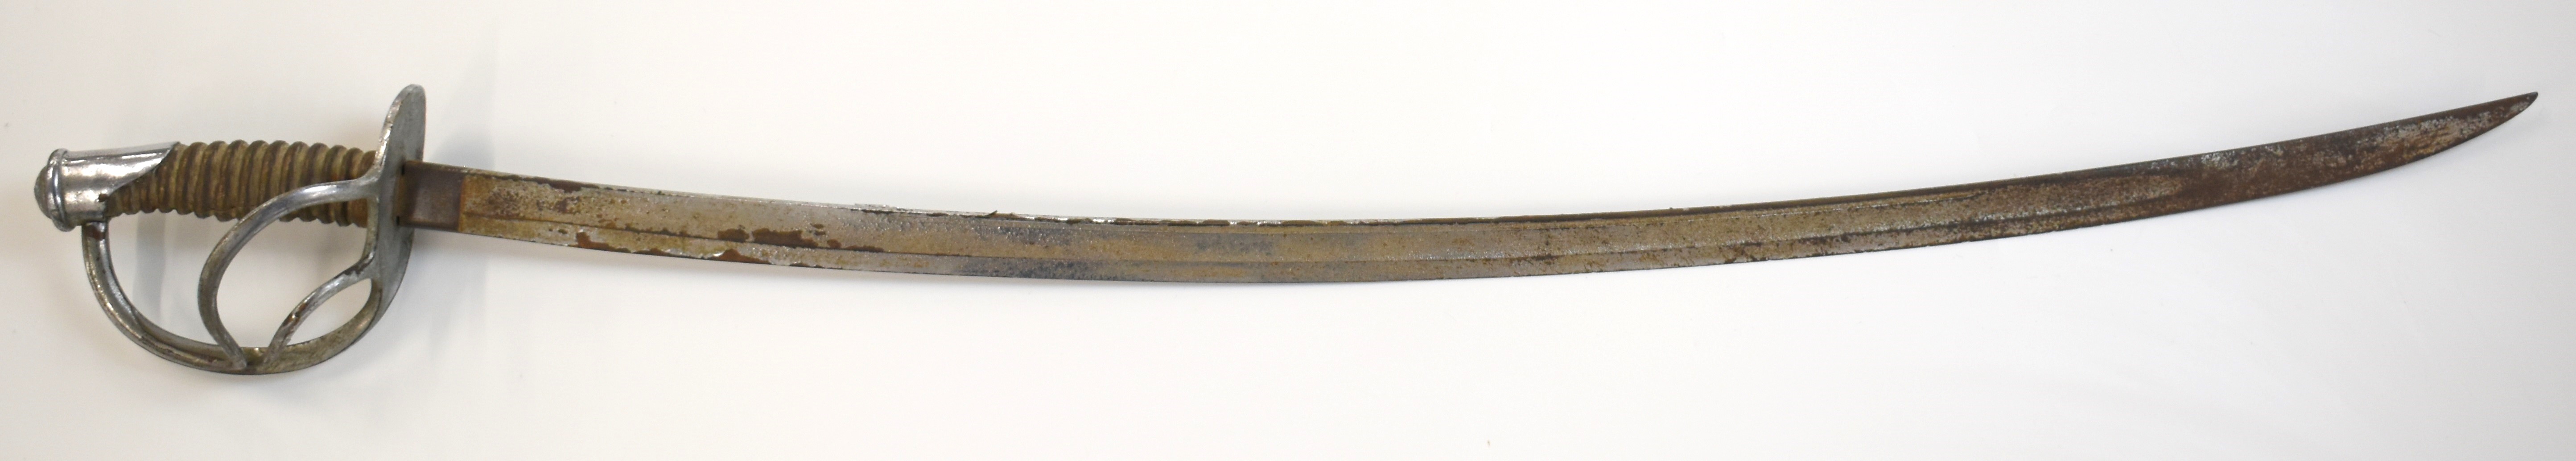 American Civil War sword with wooden grip, two bar hilt, US 1864 AGM to ricasso and Crosby - Image 19 of 26